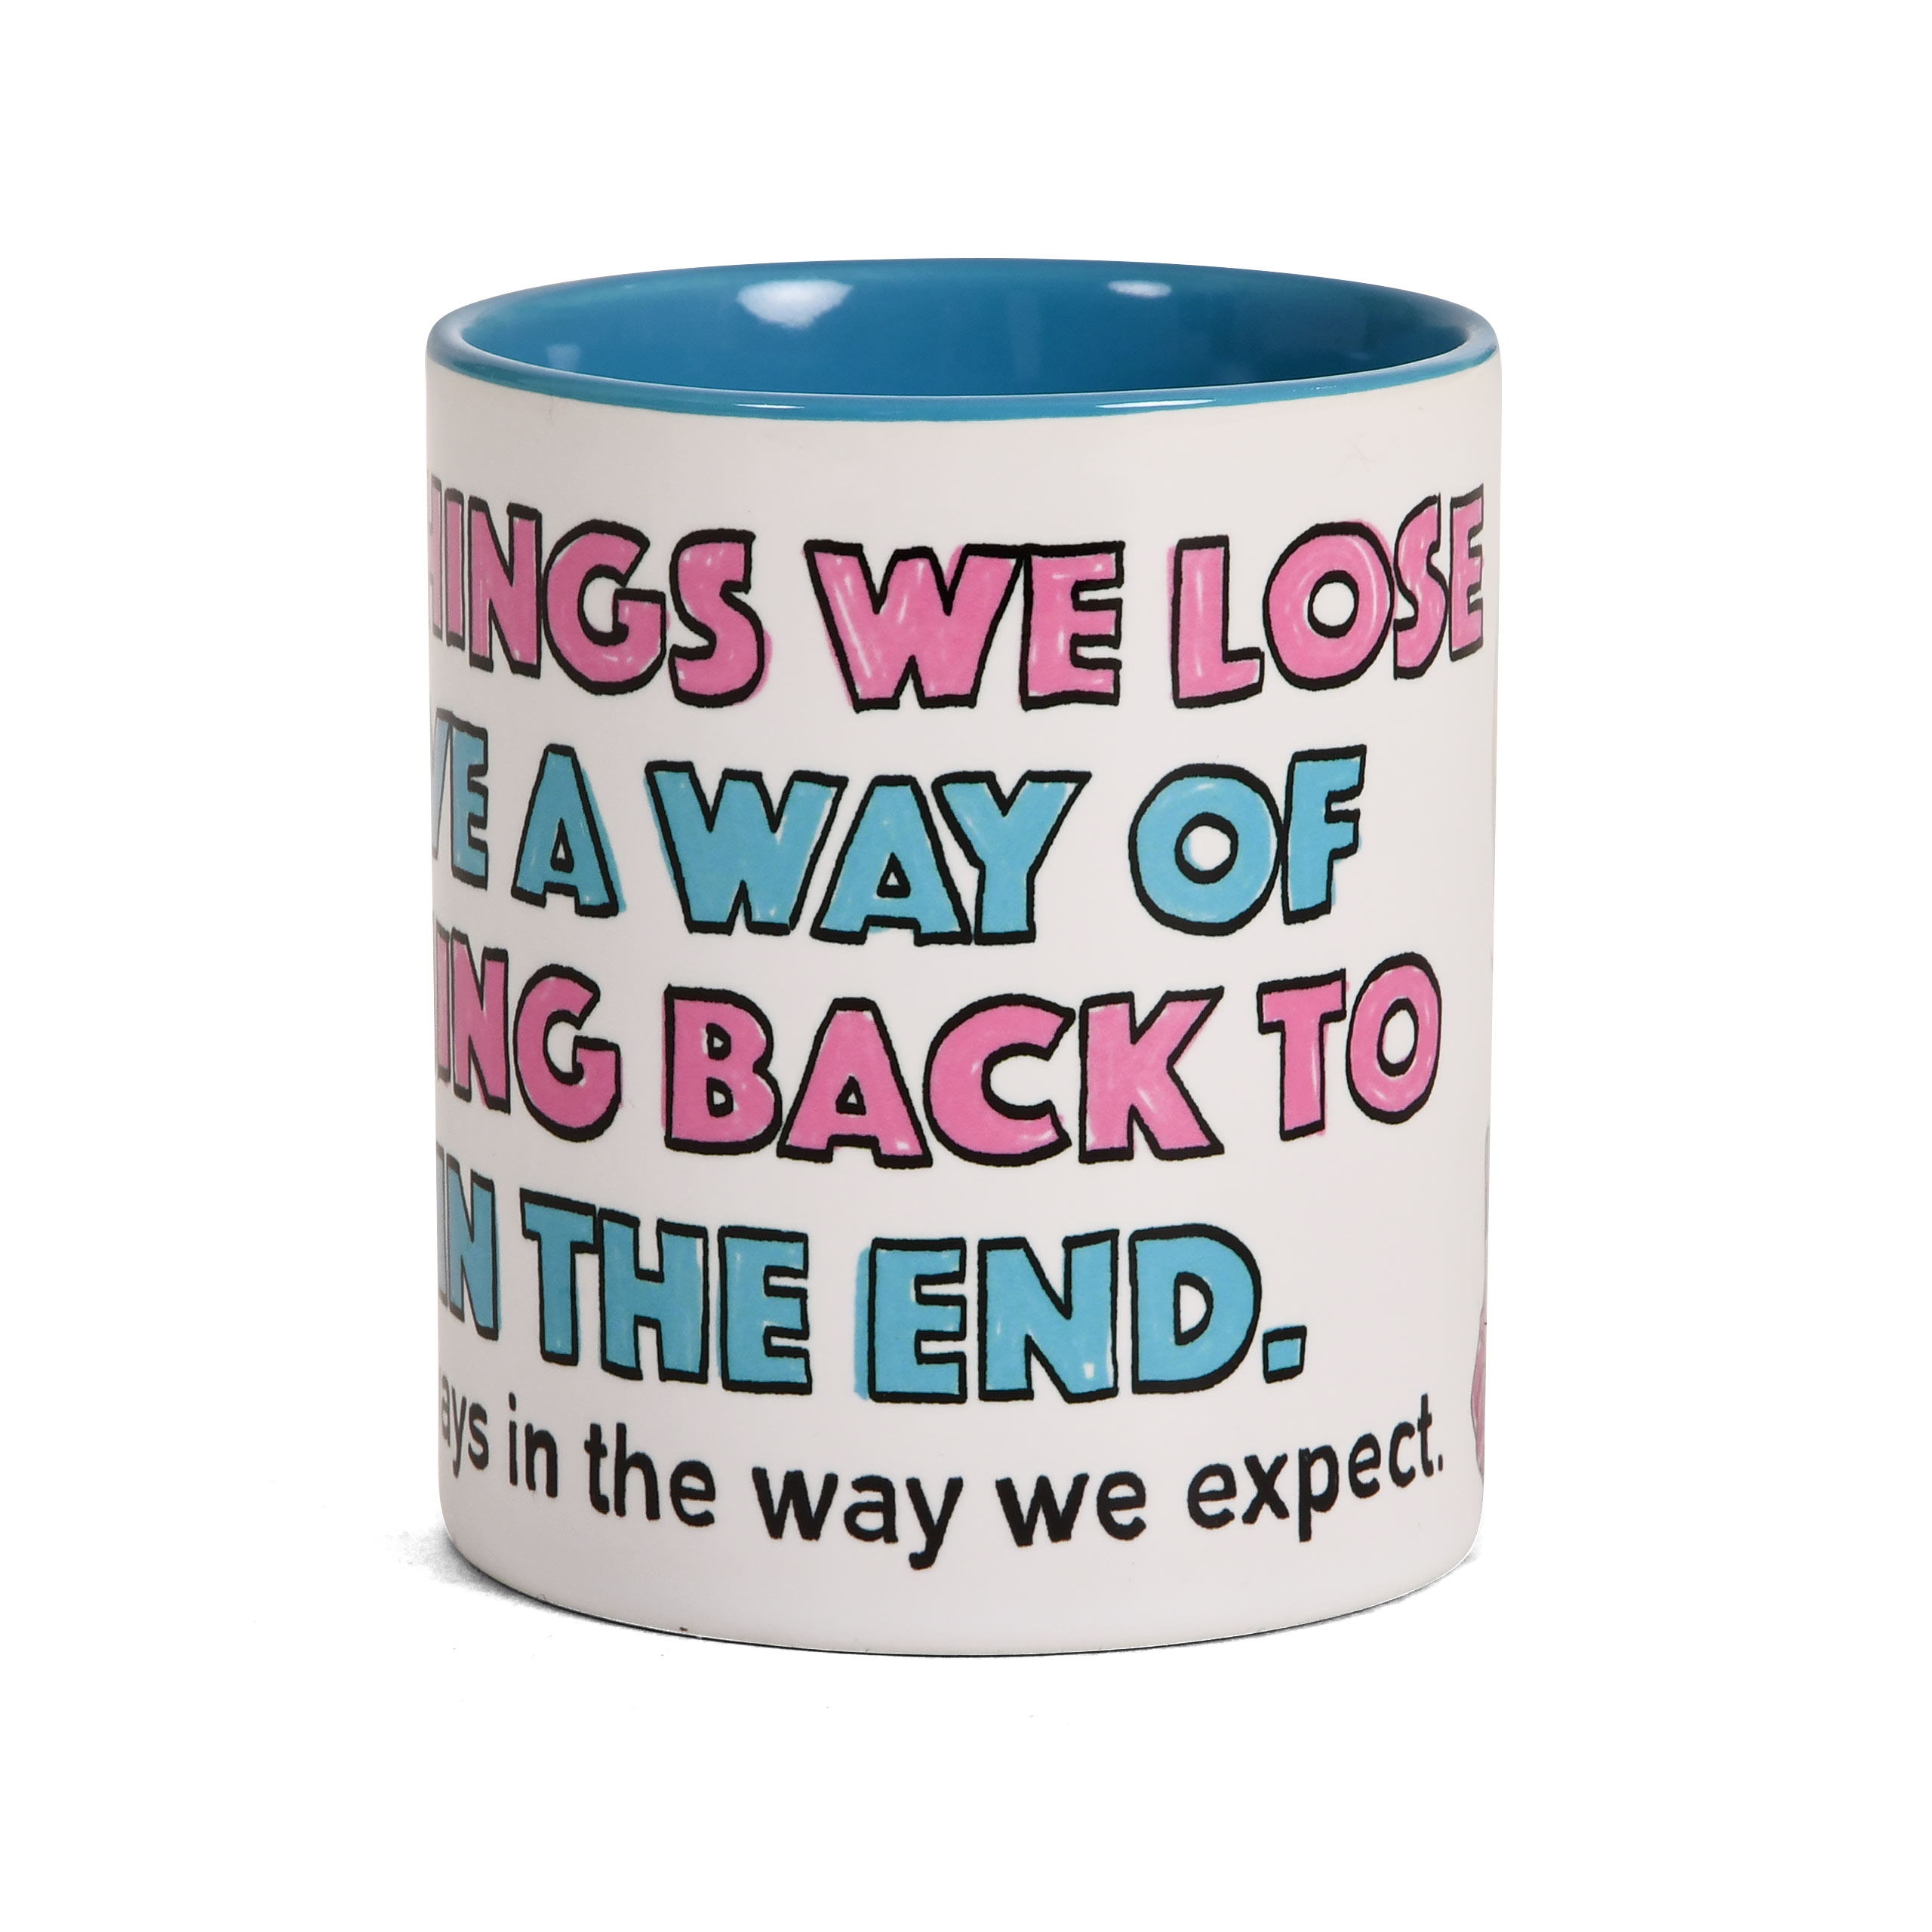 Luna The Things We Lose Come Back Tasse - Harry Potter